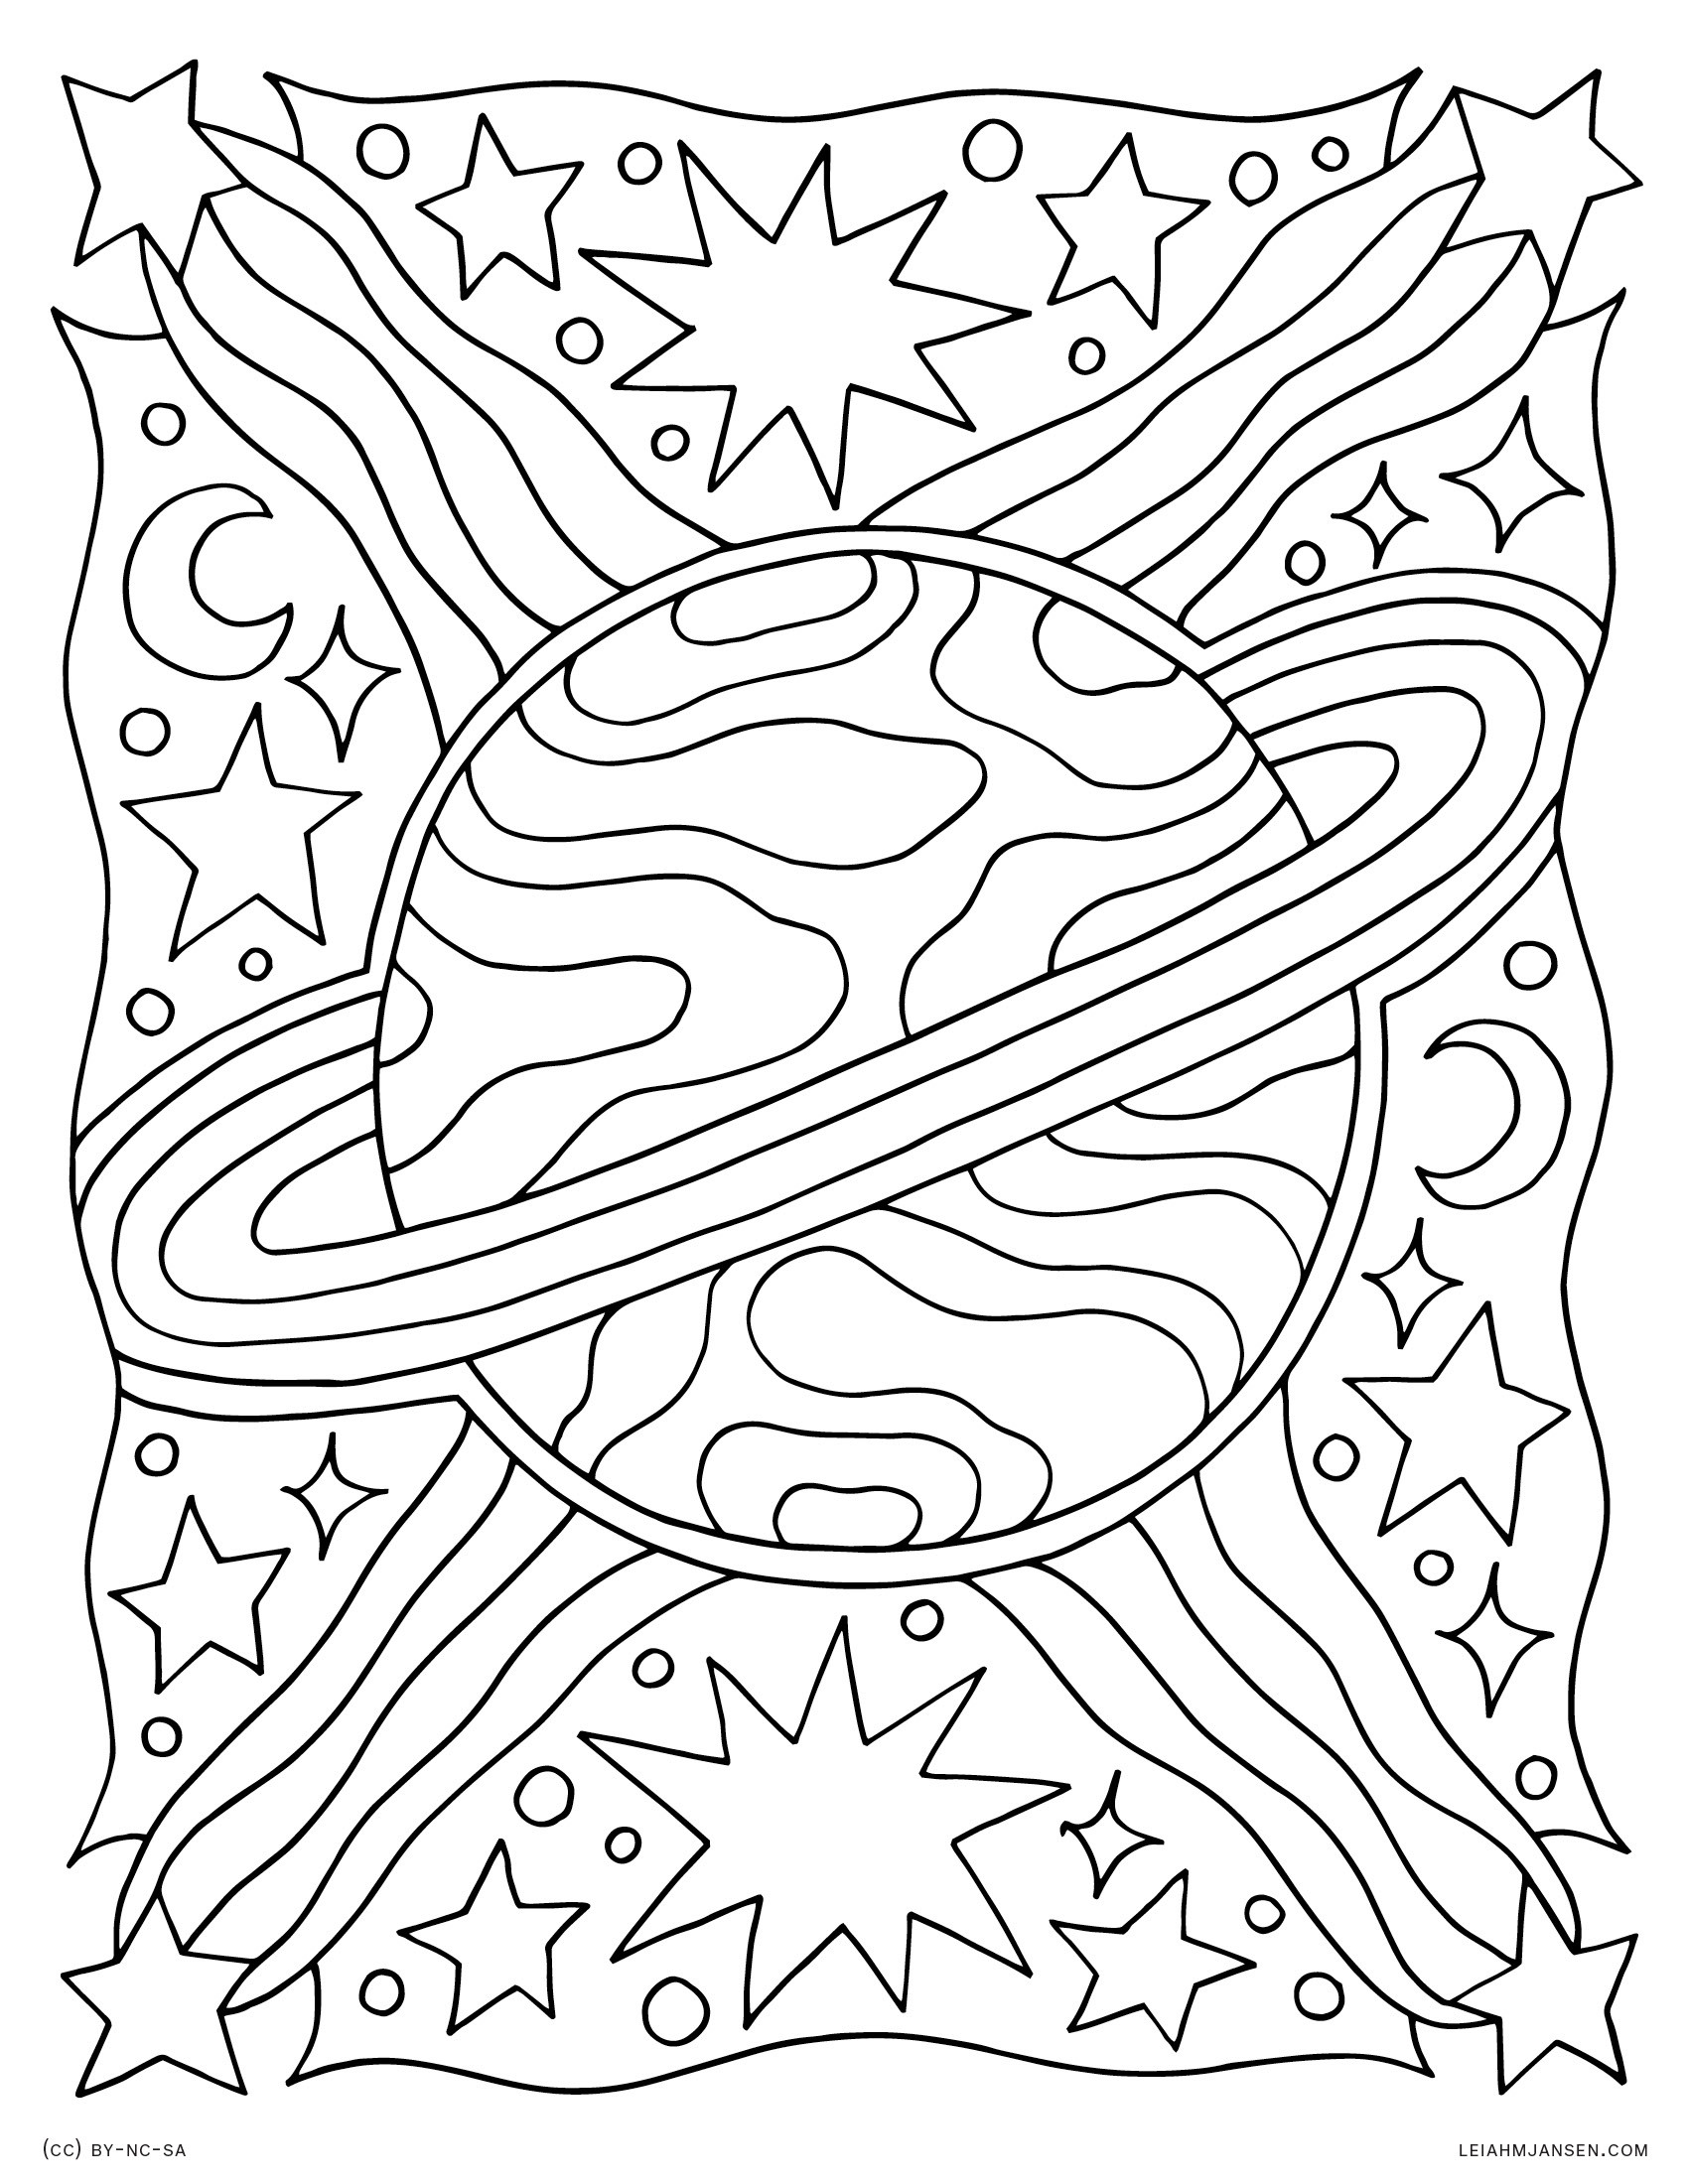 Best ideas about Coloring Pages For Adults Space
. Save or Pin Coloring Pages Now.